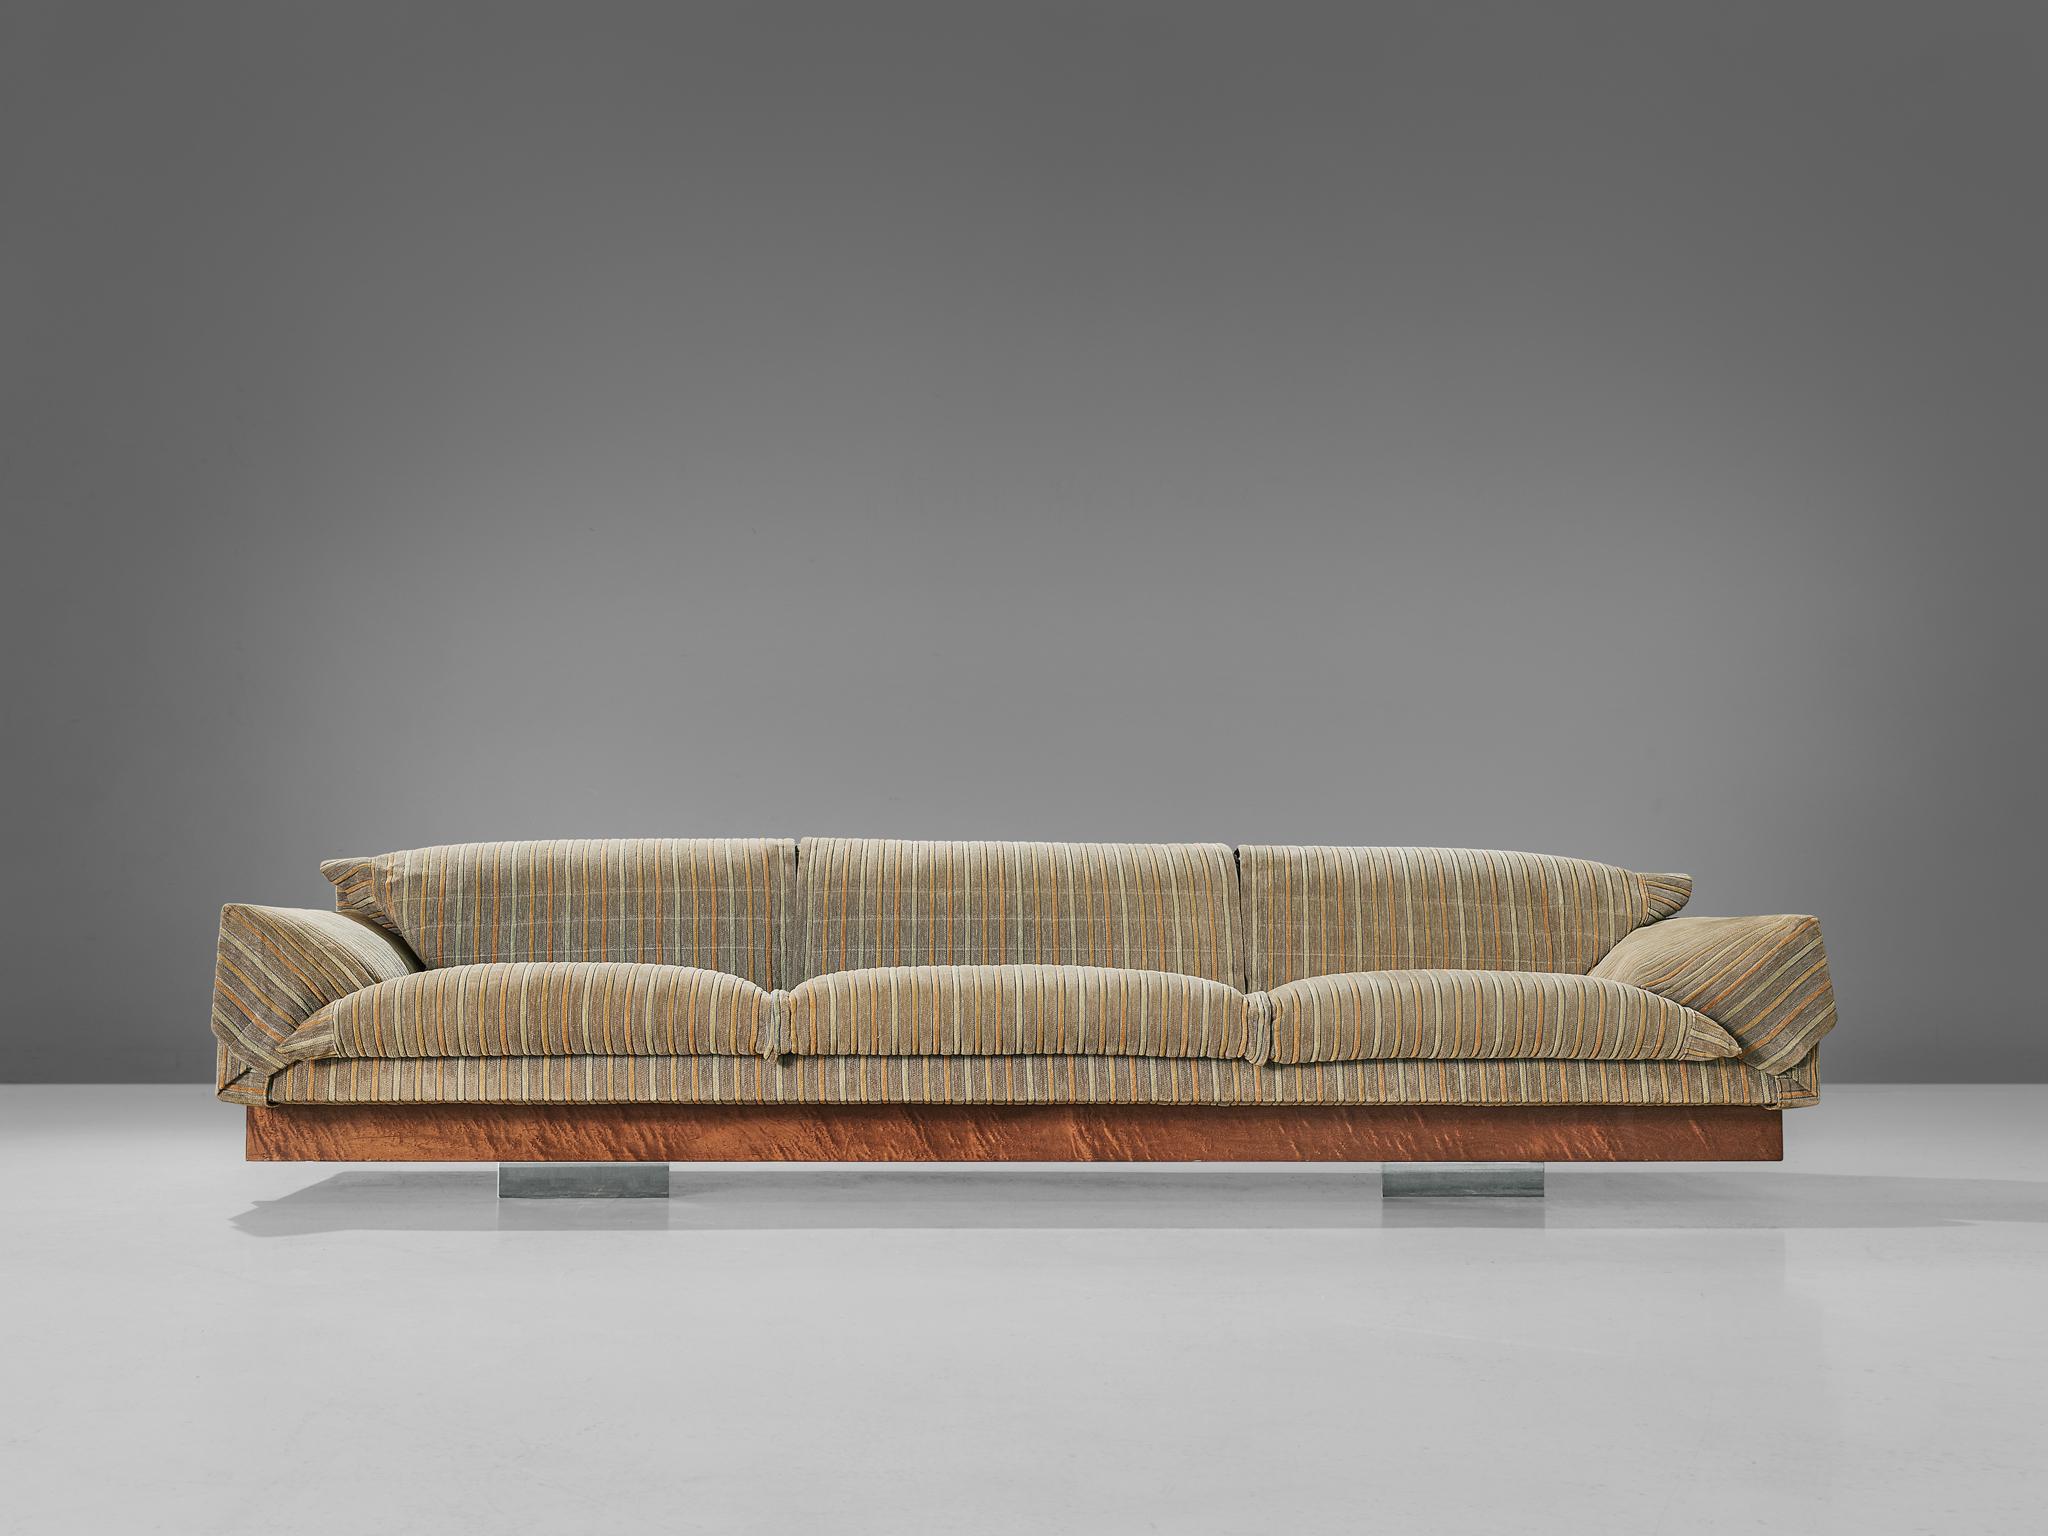 Saporiti, three-seat sofa, upholstered in beige striped fabric, metal, birds eye maple, Italy, 1960s

Large sofa manufactured by Saporiti. This sofa is designed to be comfortable, soft and inviting. It has three seats with round sloping armrest,